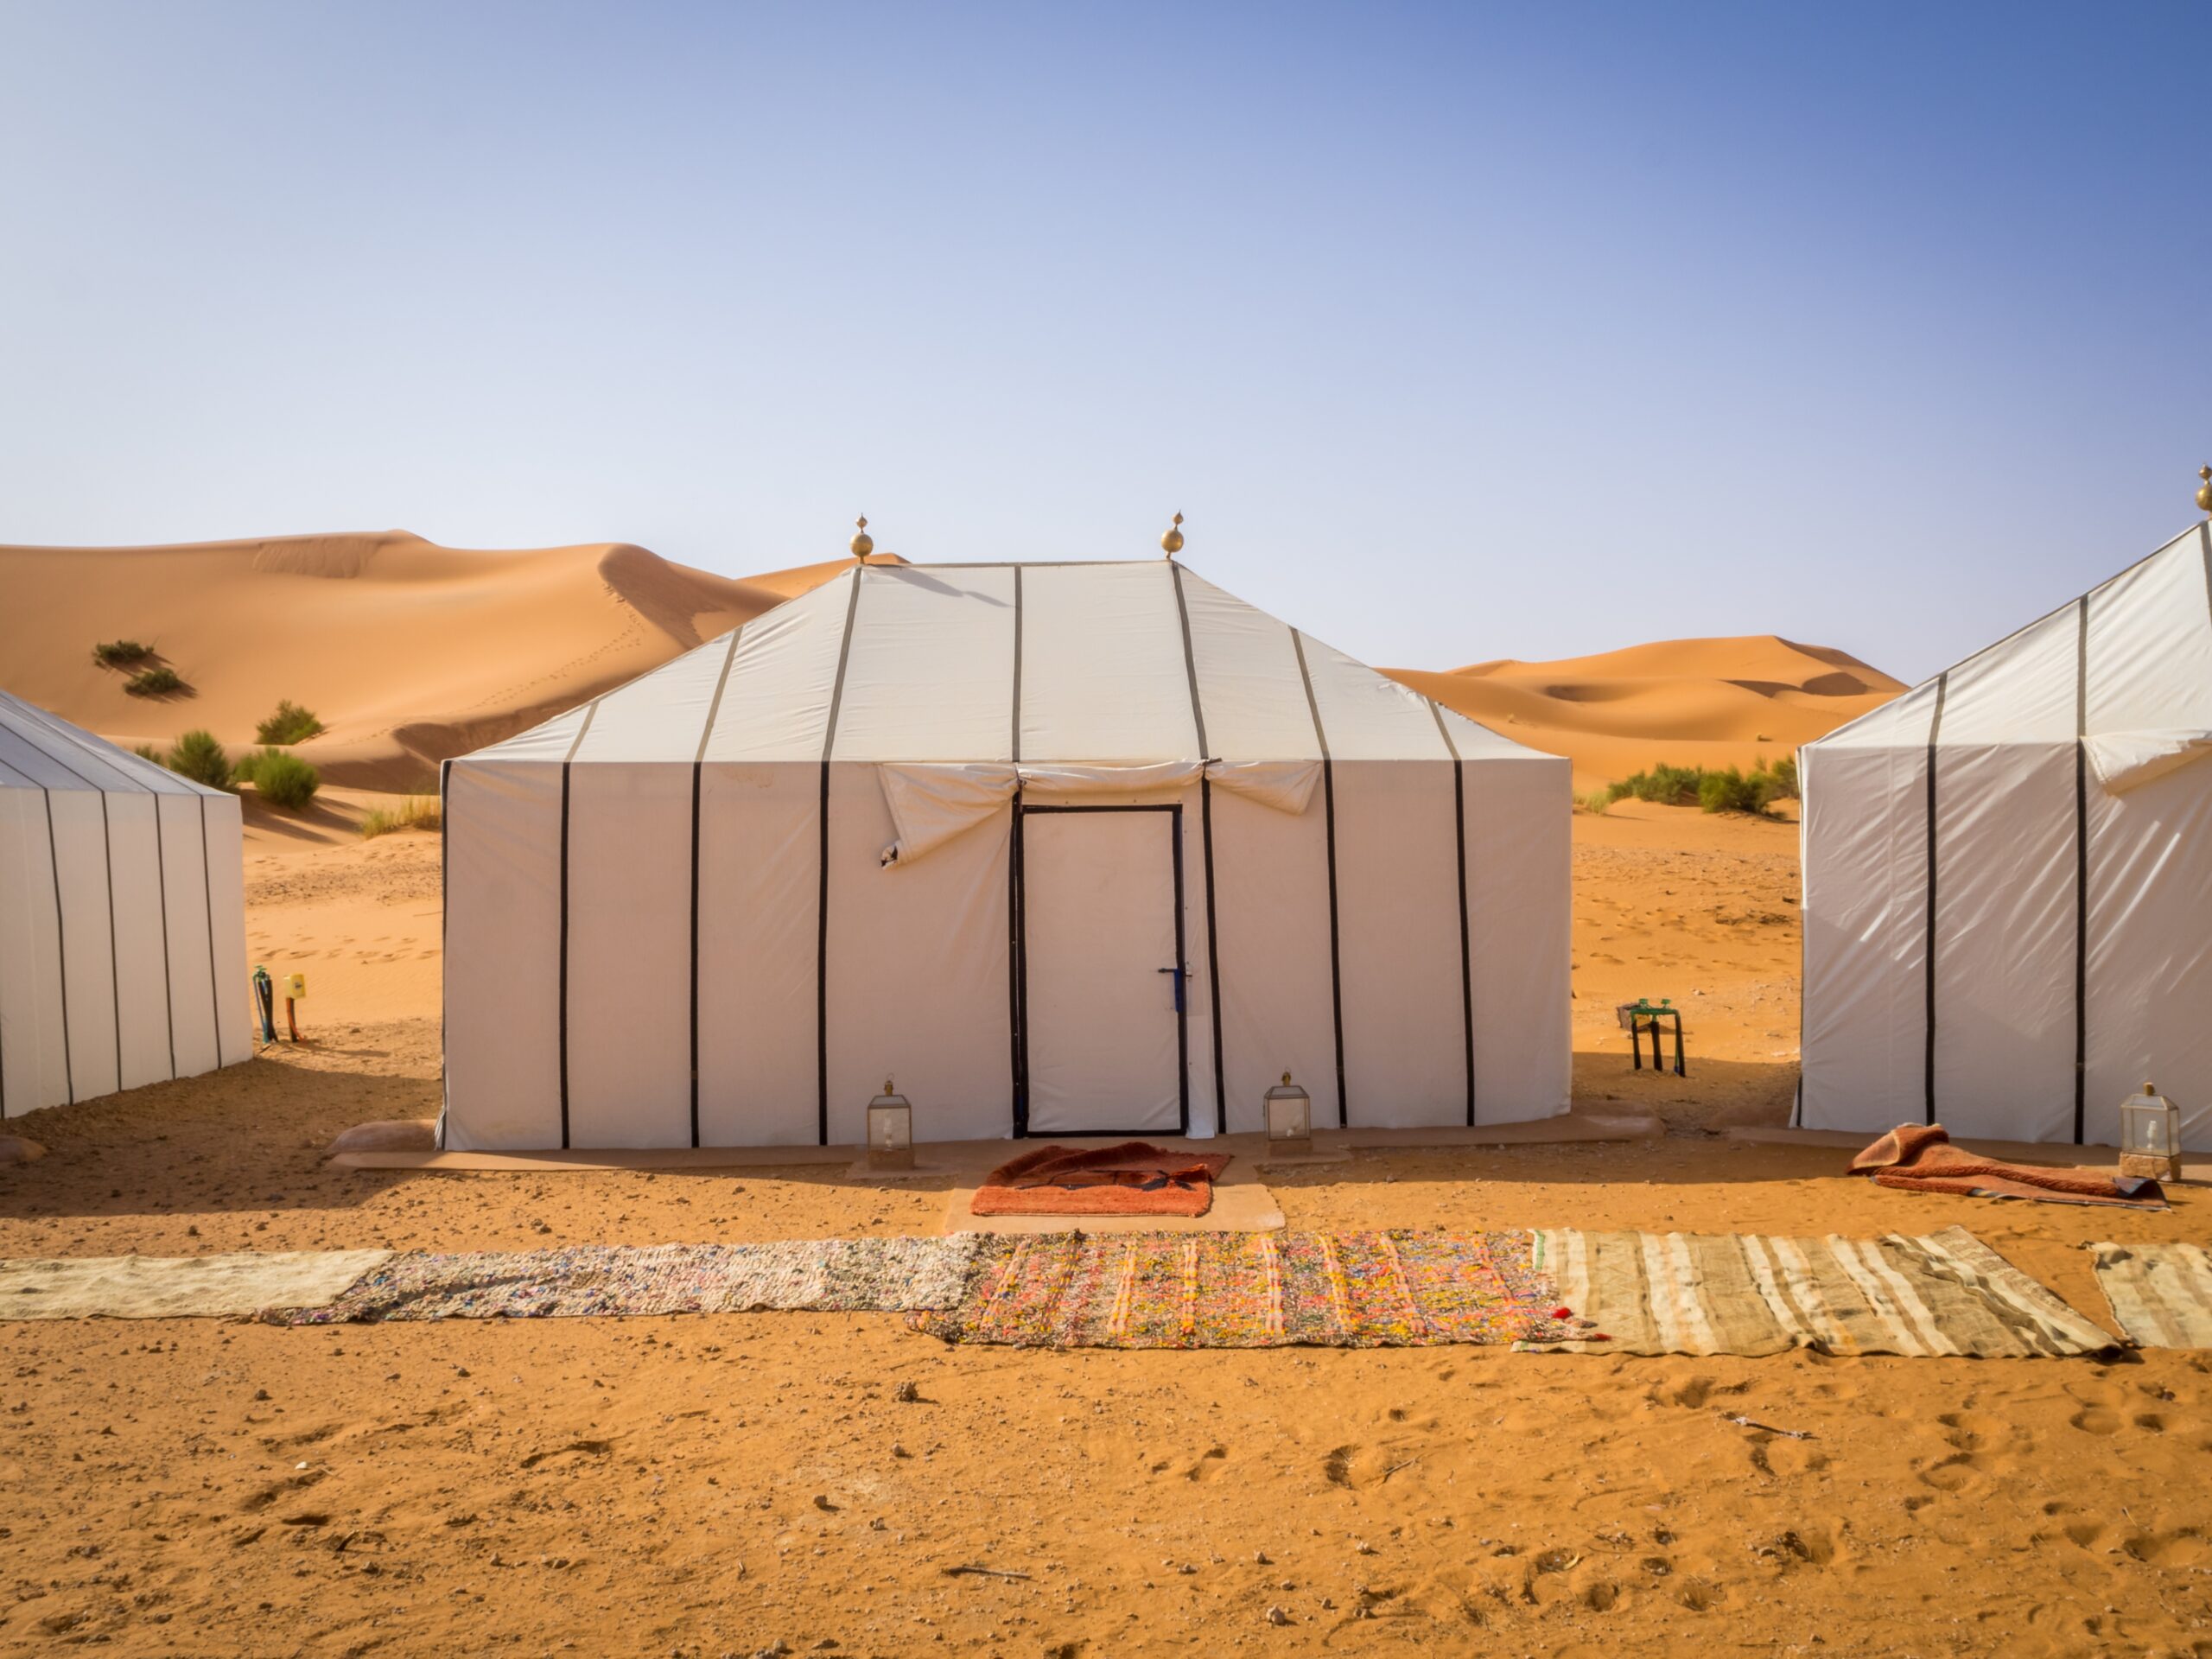 White Berber tents in the Sahara Desert, Morocco with carpets on the sandy ground